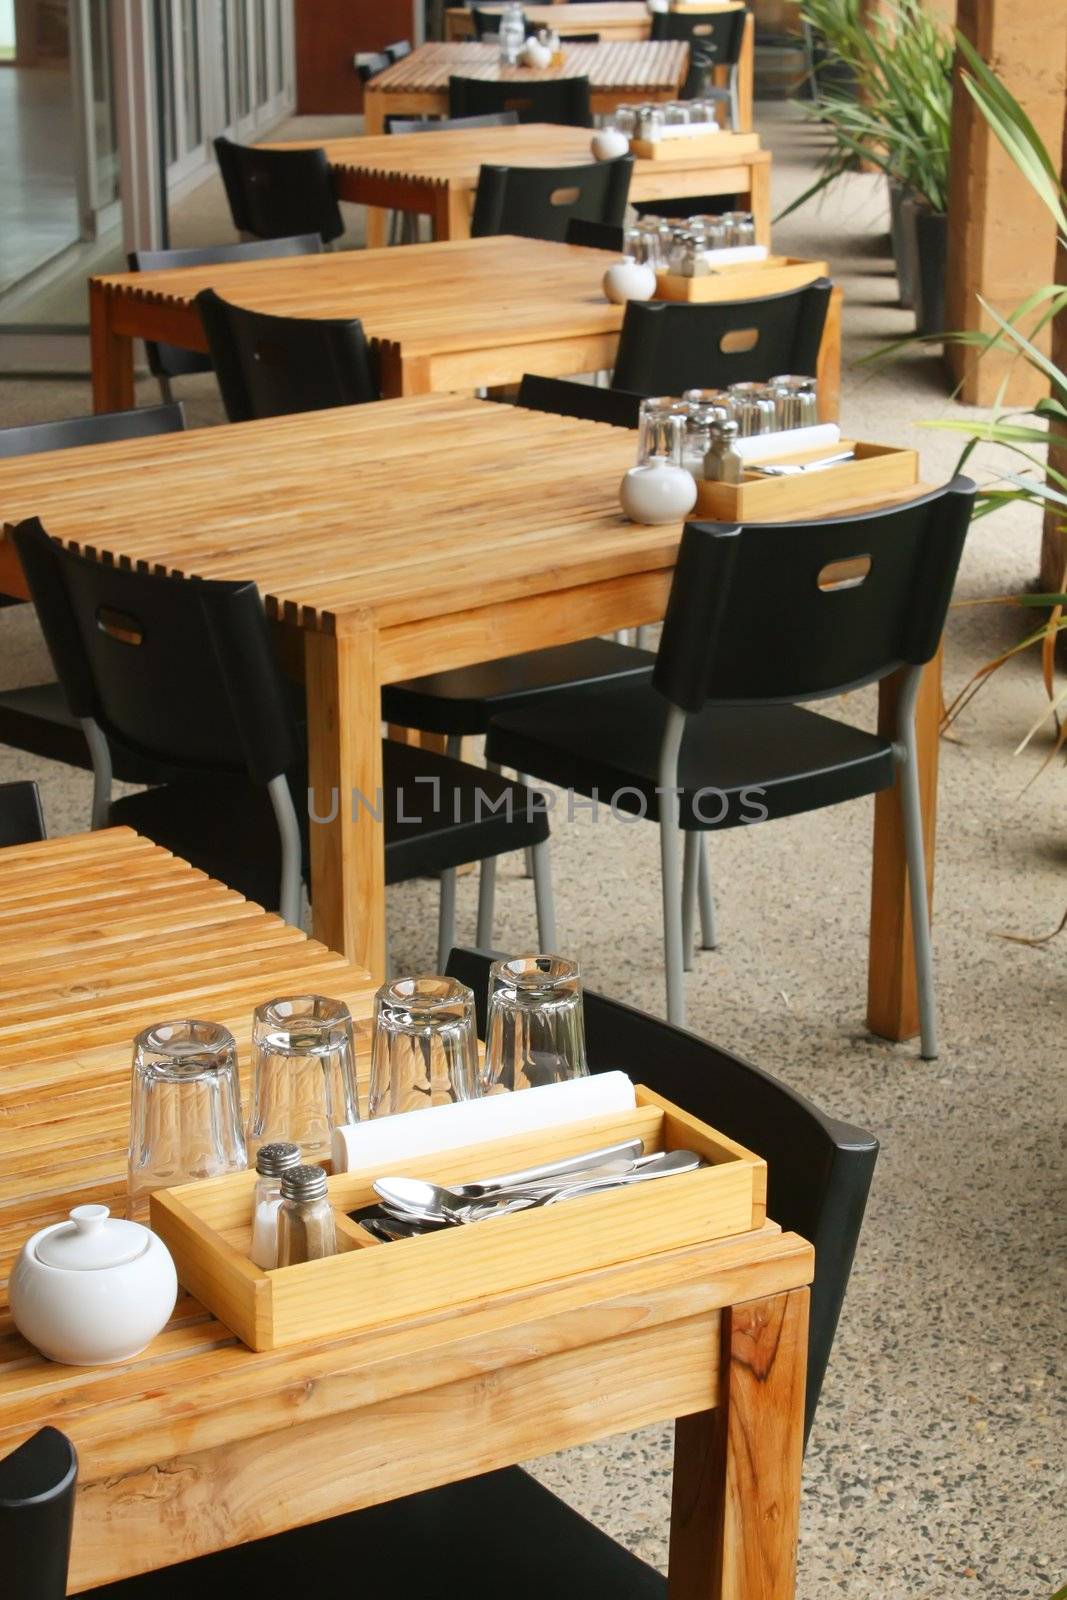 Outdoor Dining in the Day Open Air Space